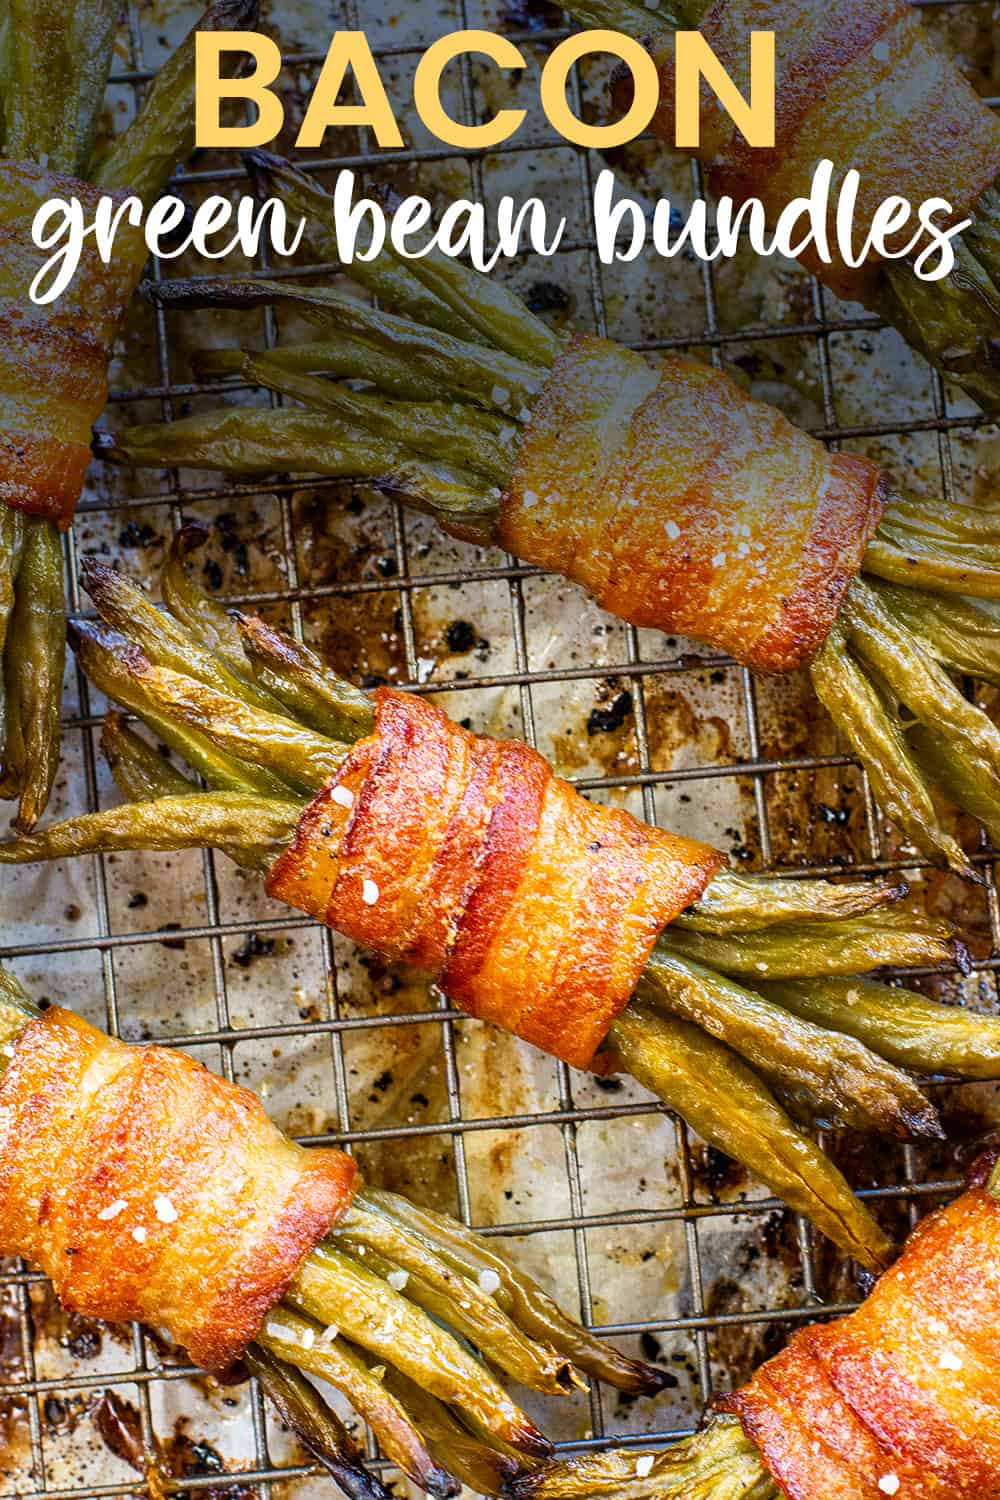 Bacon wrapped green beans on cooling rack.